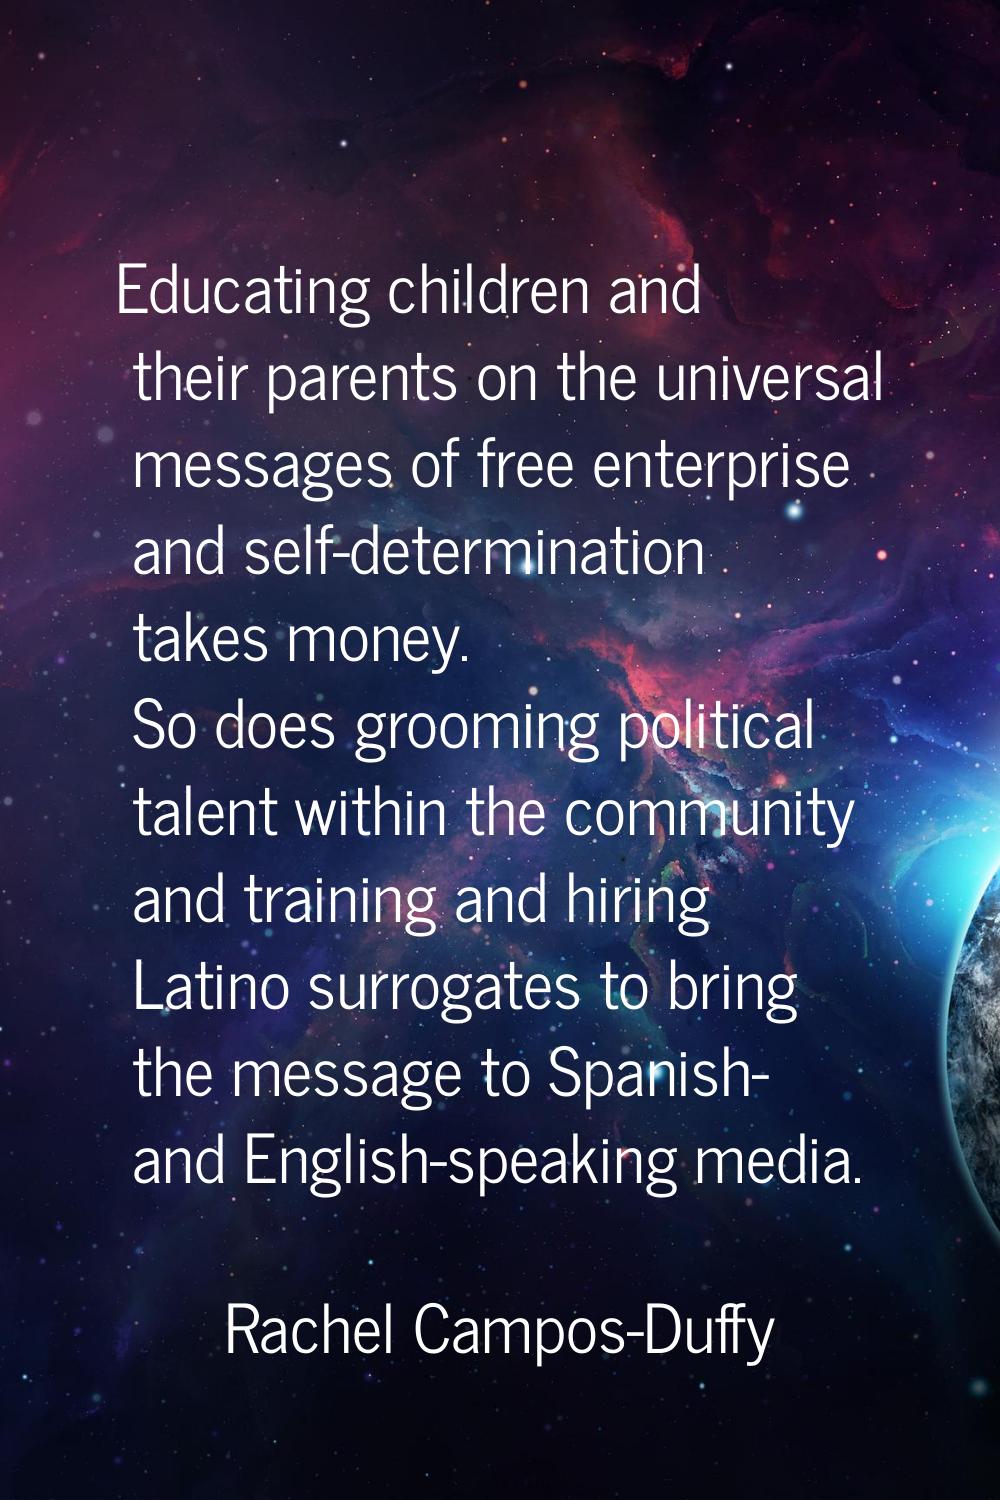 Educating children and their parents on the universal messages of free enterprise and self-determin